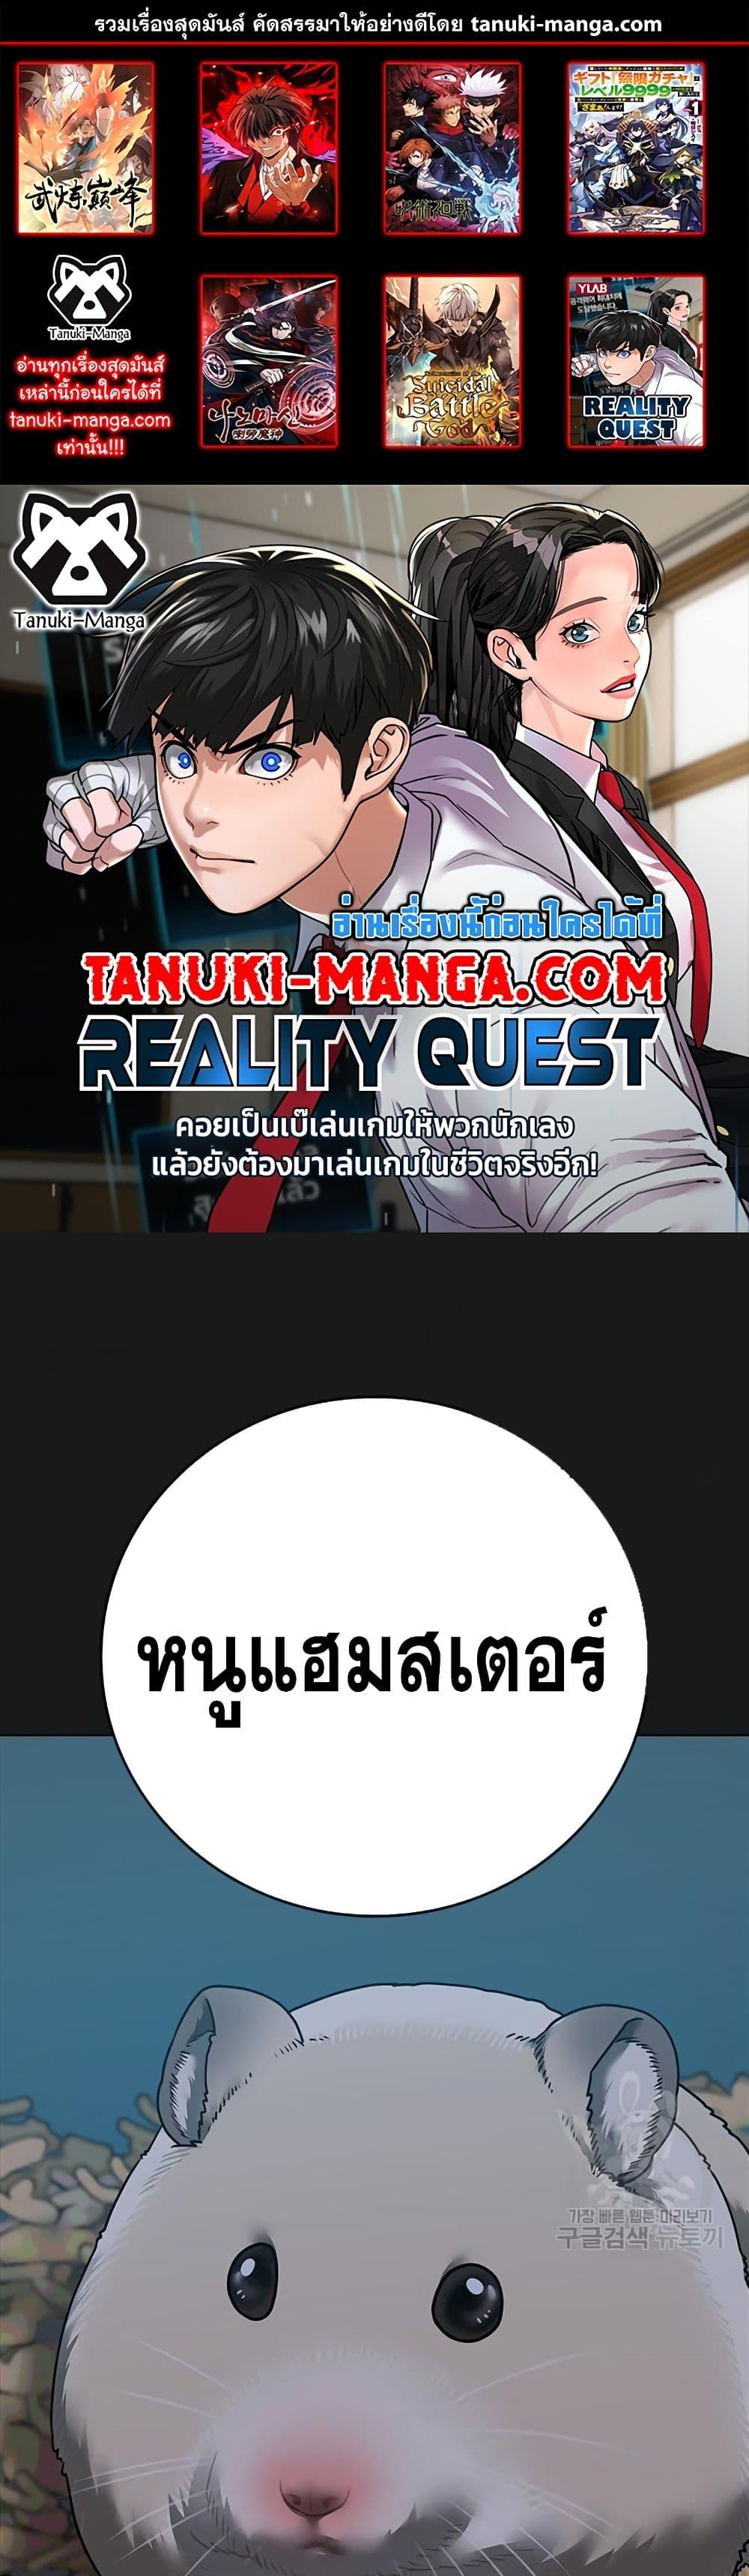 Reality Quest 84 01